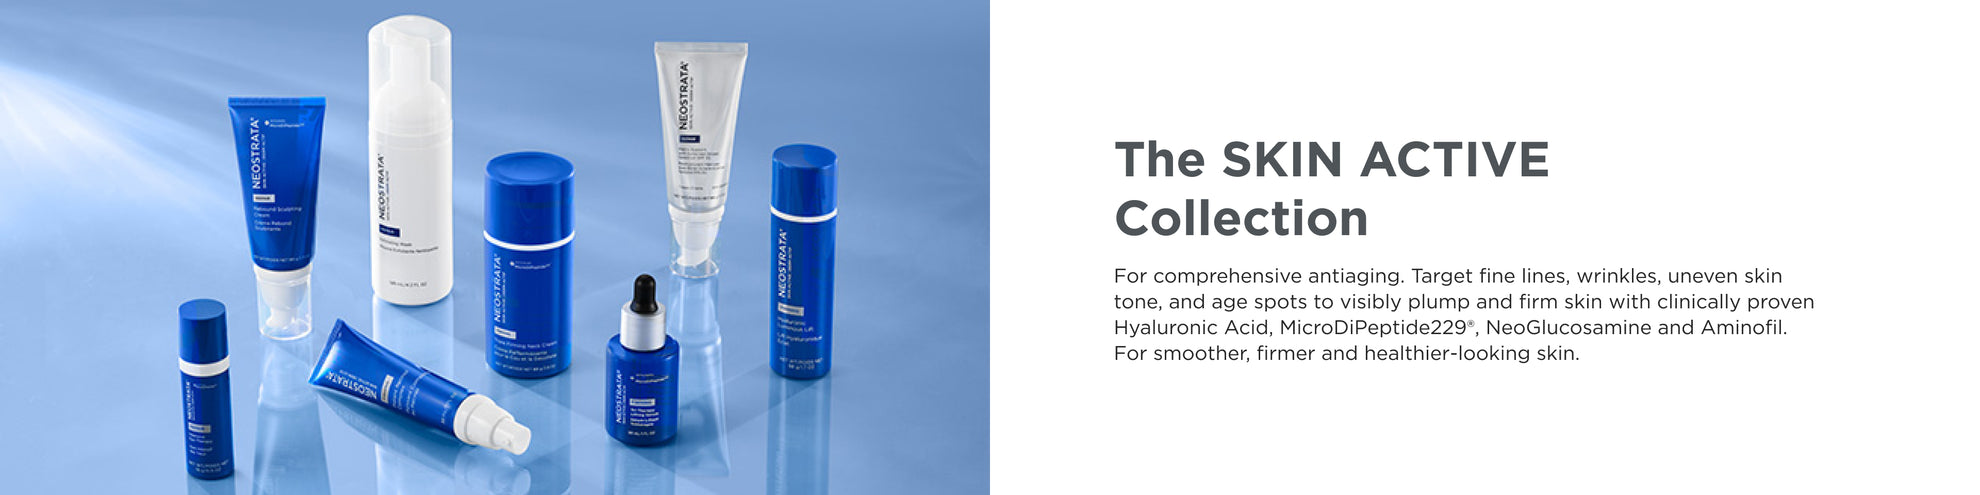 The SKIN ACTIVE Collection